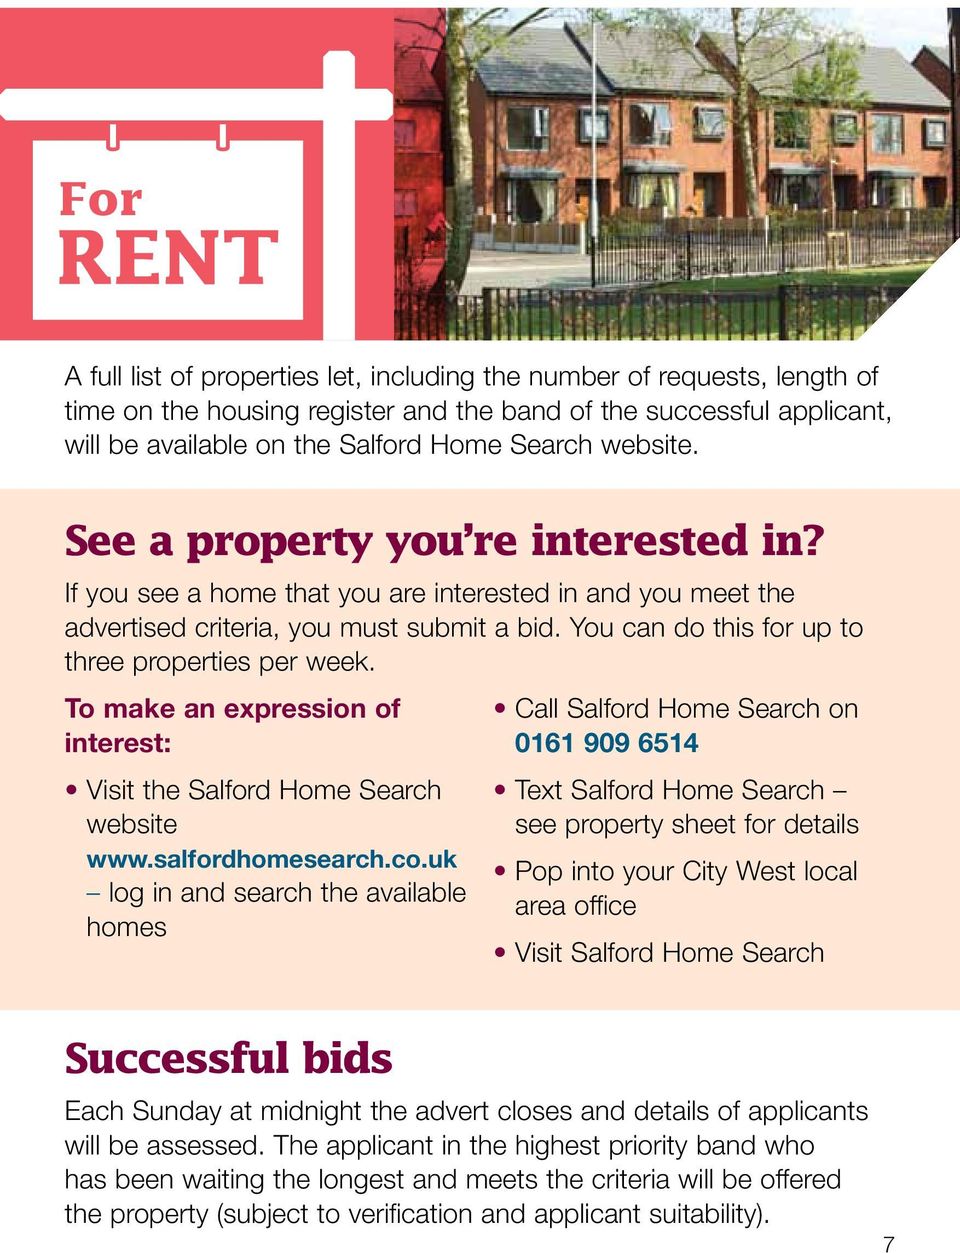 To make an expression of interest: Visit the Salford Home Search website www.salfordhomesearch.co.